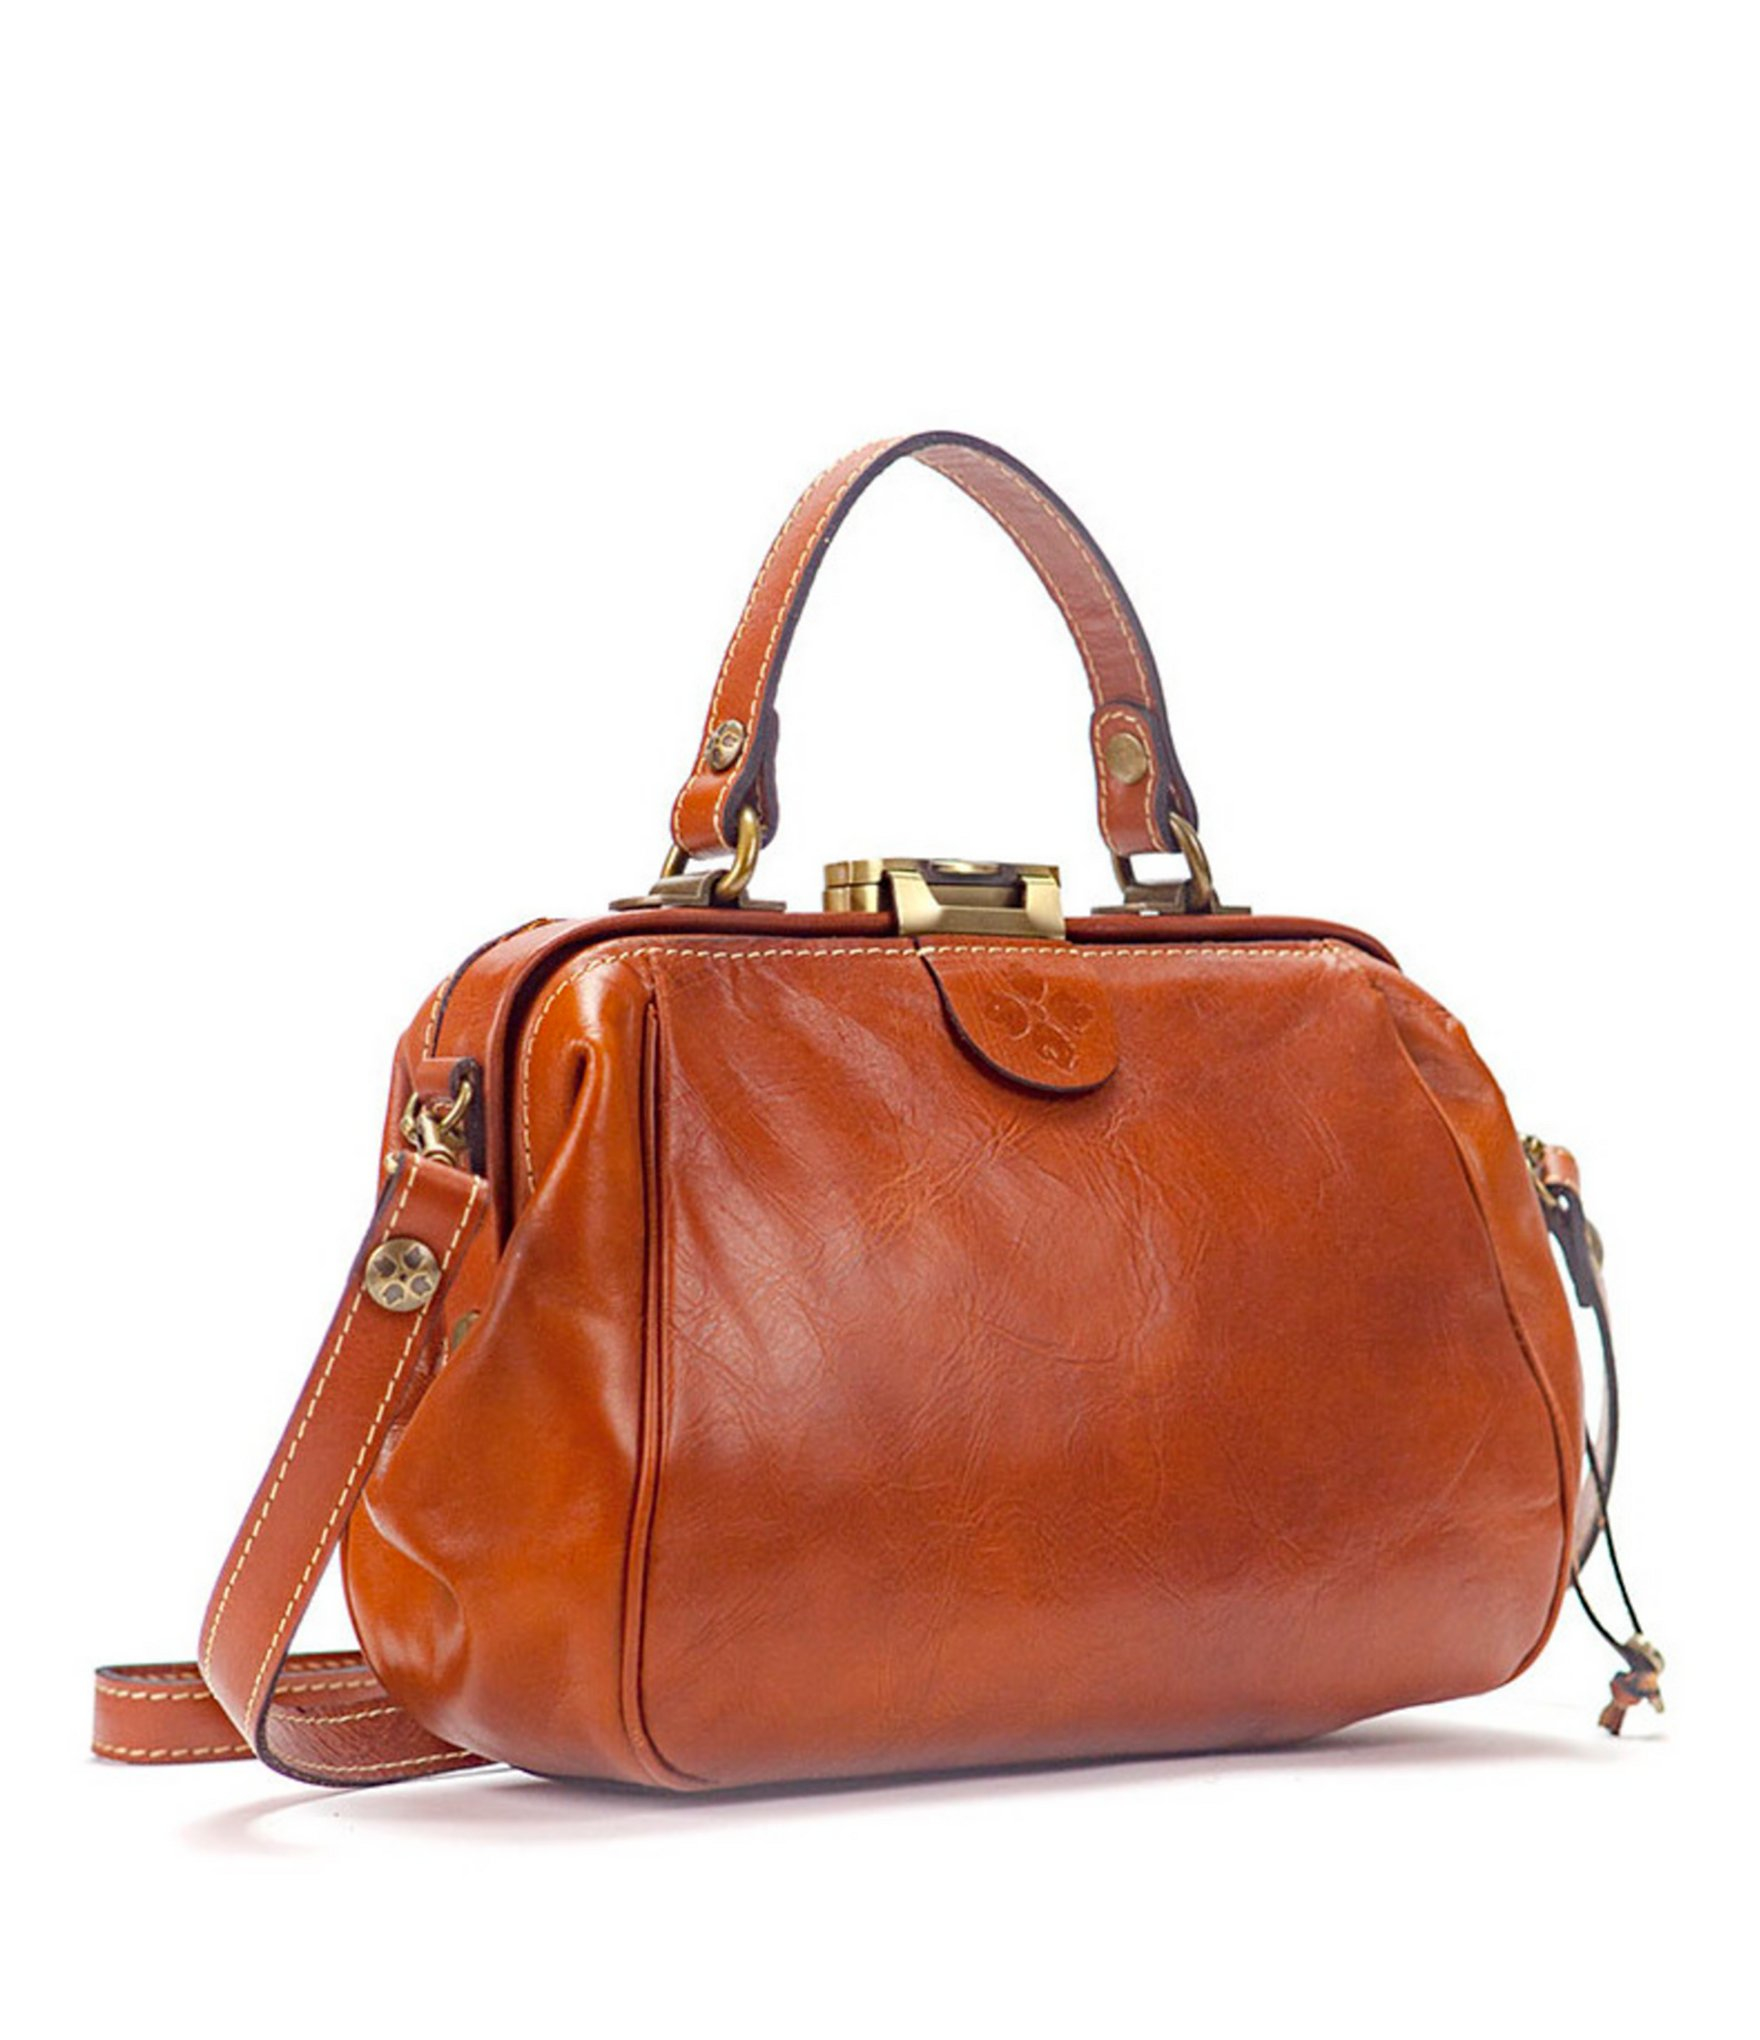 Patricia Nash Heritage Collection Gracchi Satchel in Brown - Lyst